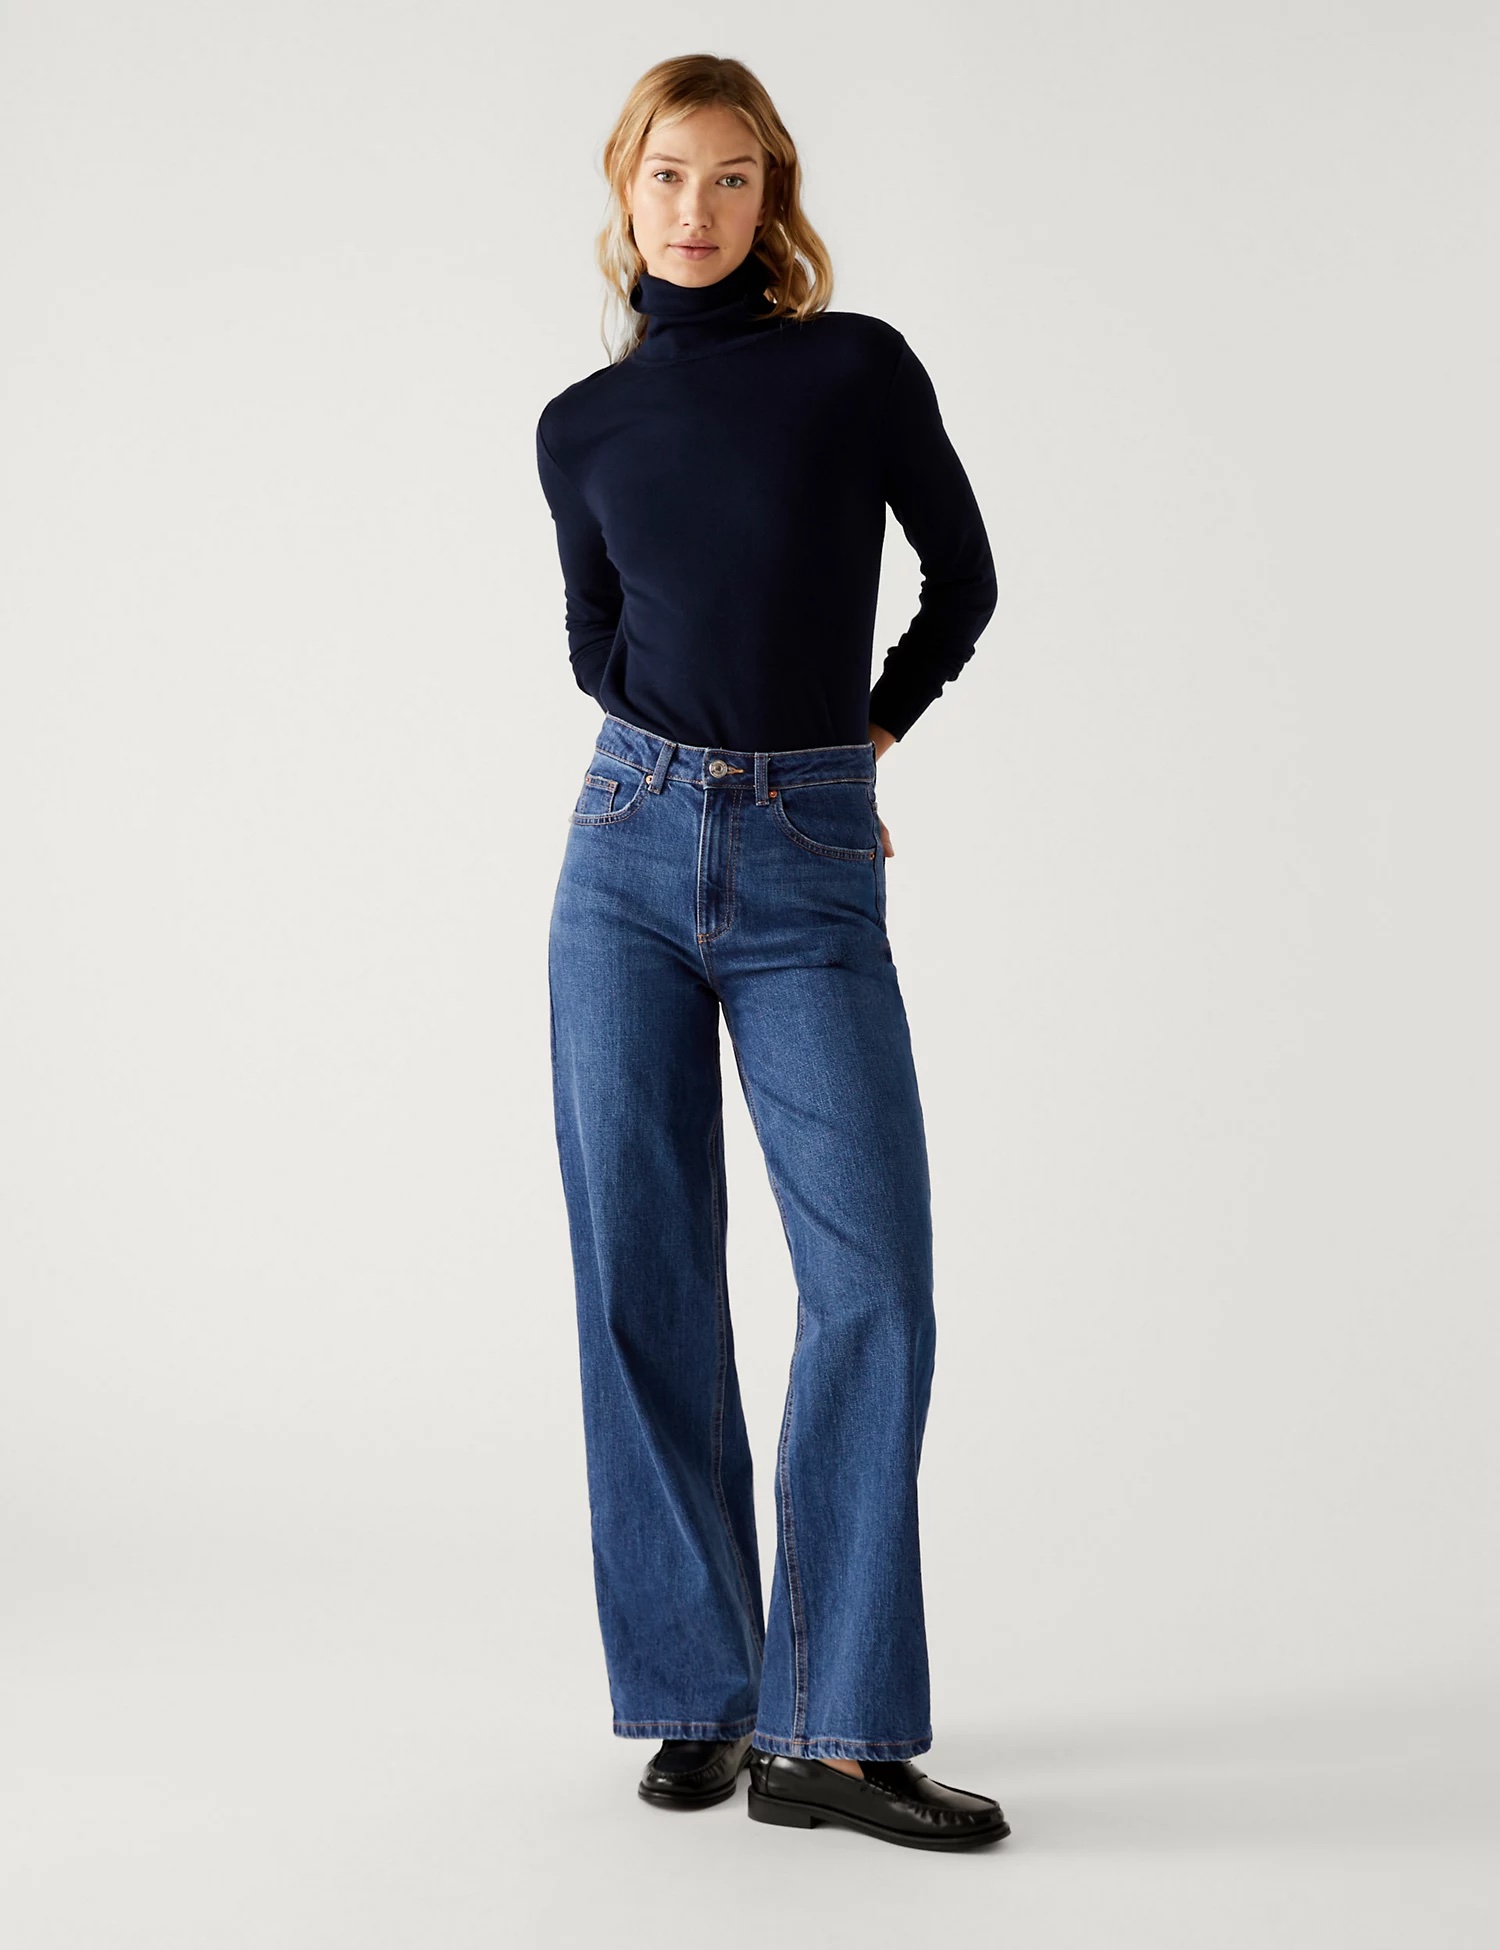 I Tried On the Best M&S Jeans, and I'm Officially a Convert | Who What ...